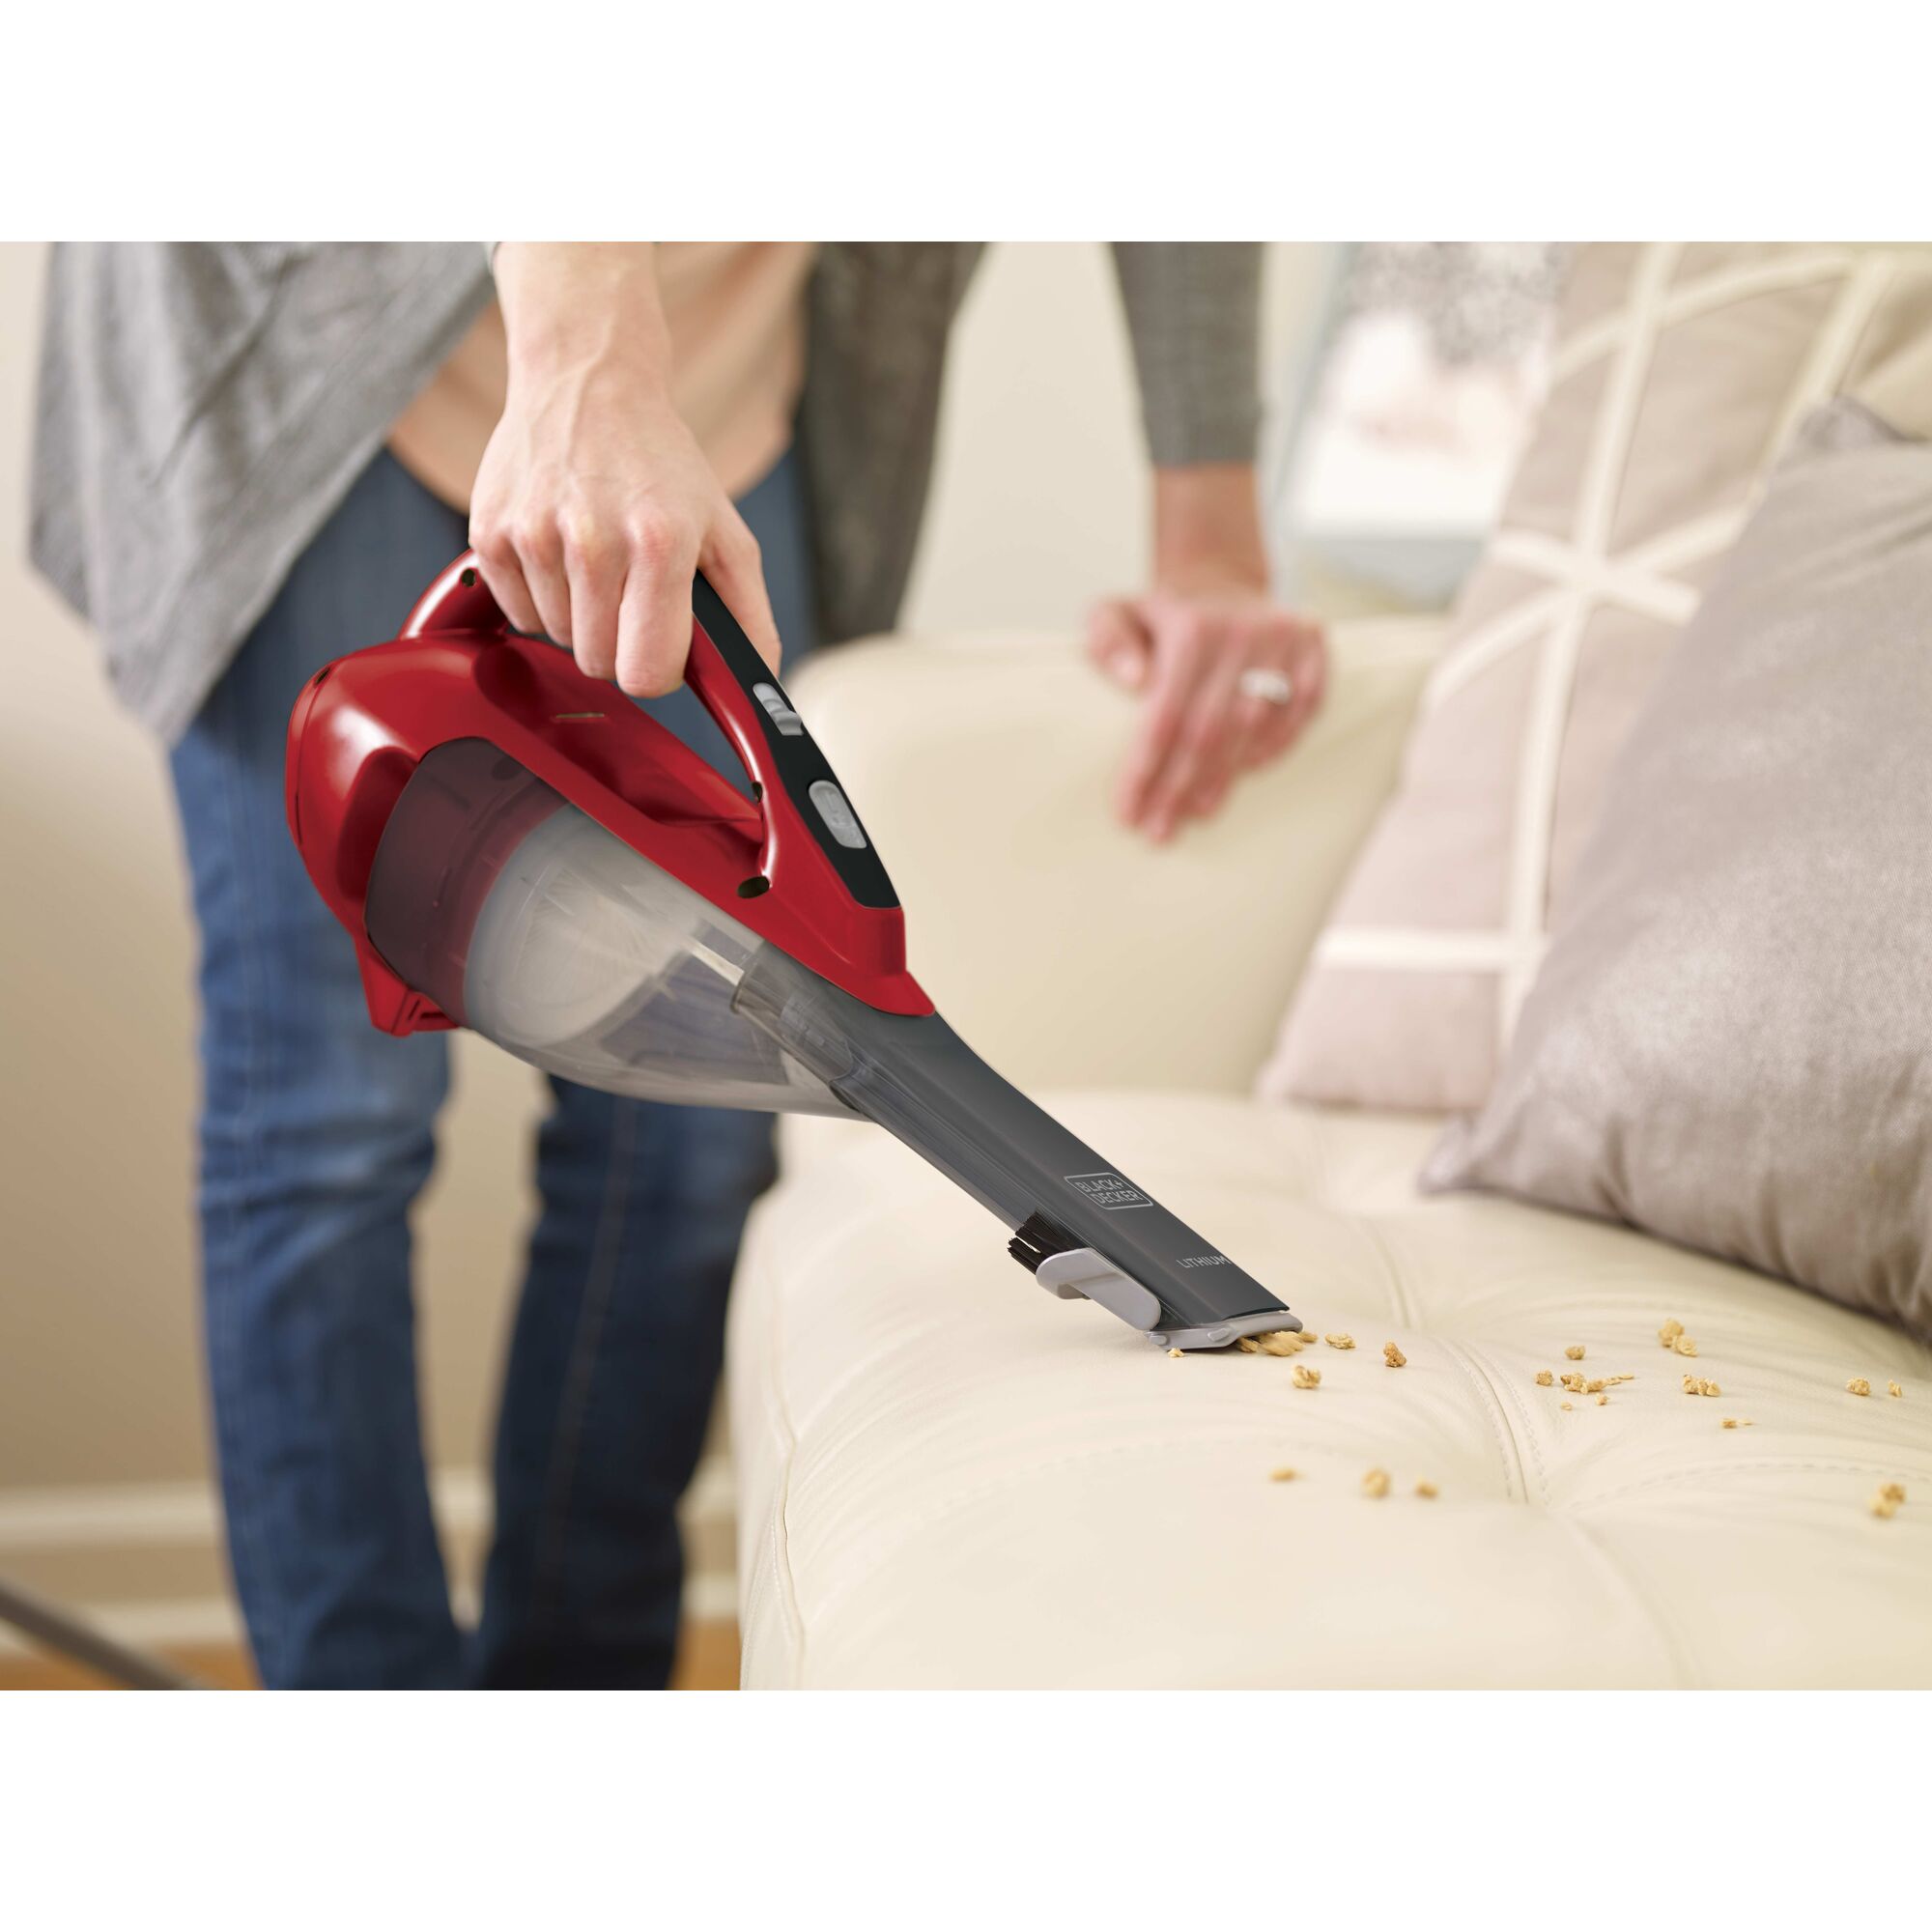 Dustbuster advanced clean cordless hand vacuum cleaning sofa.\n